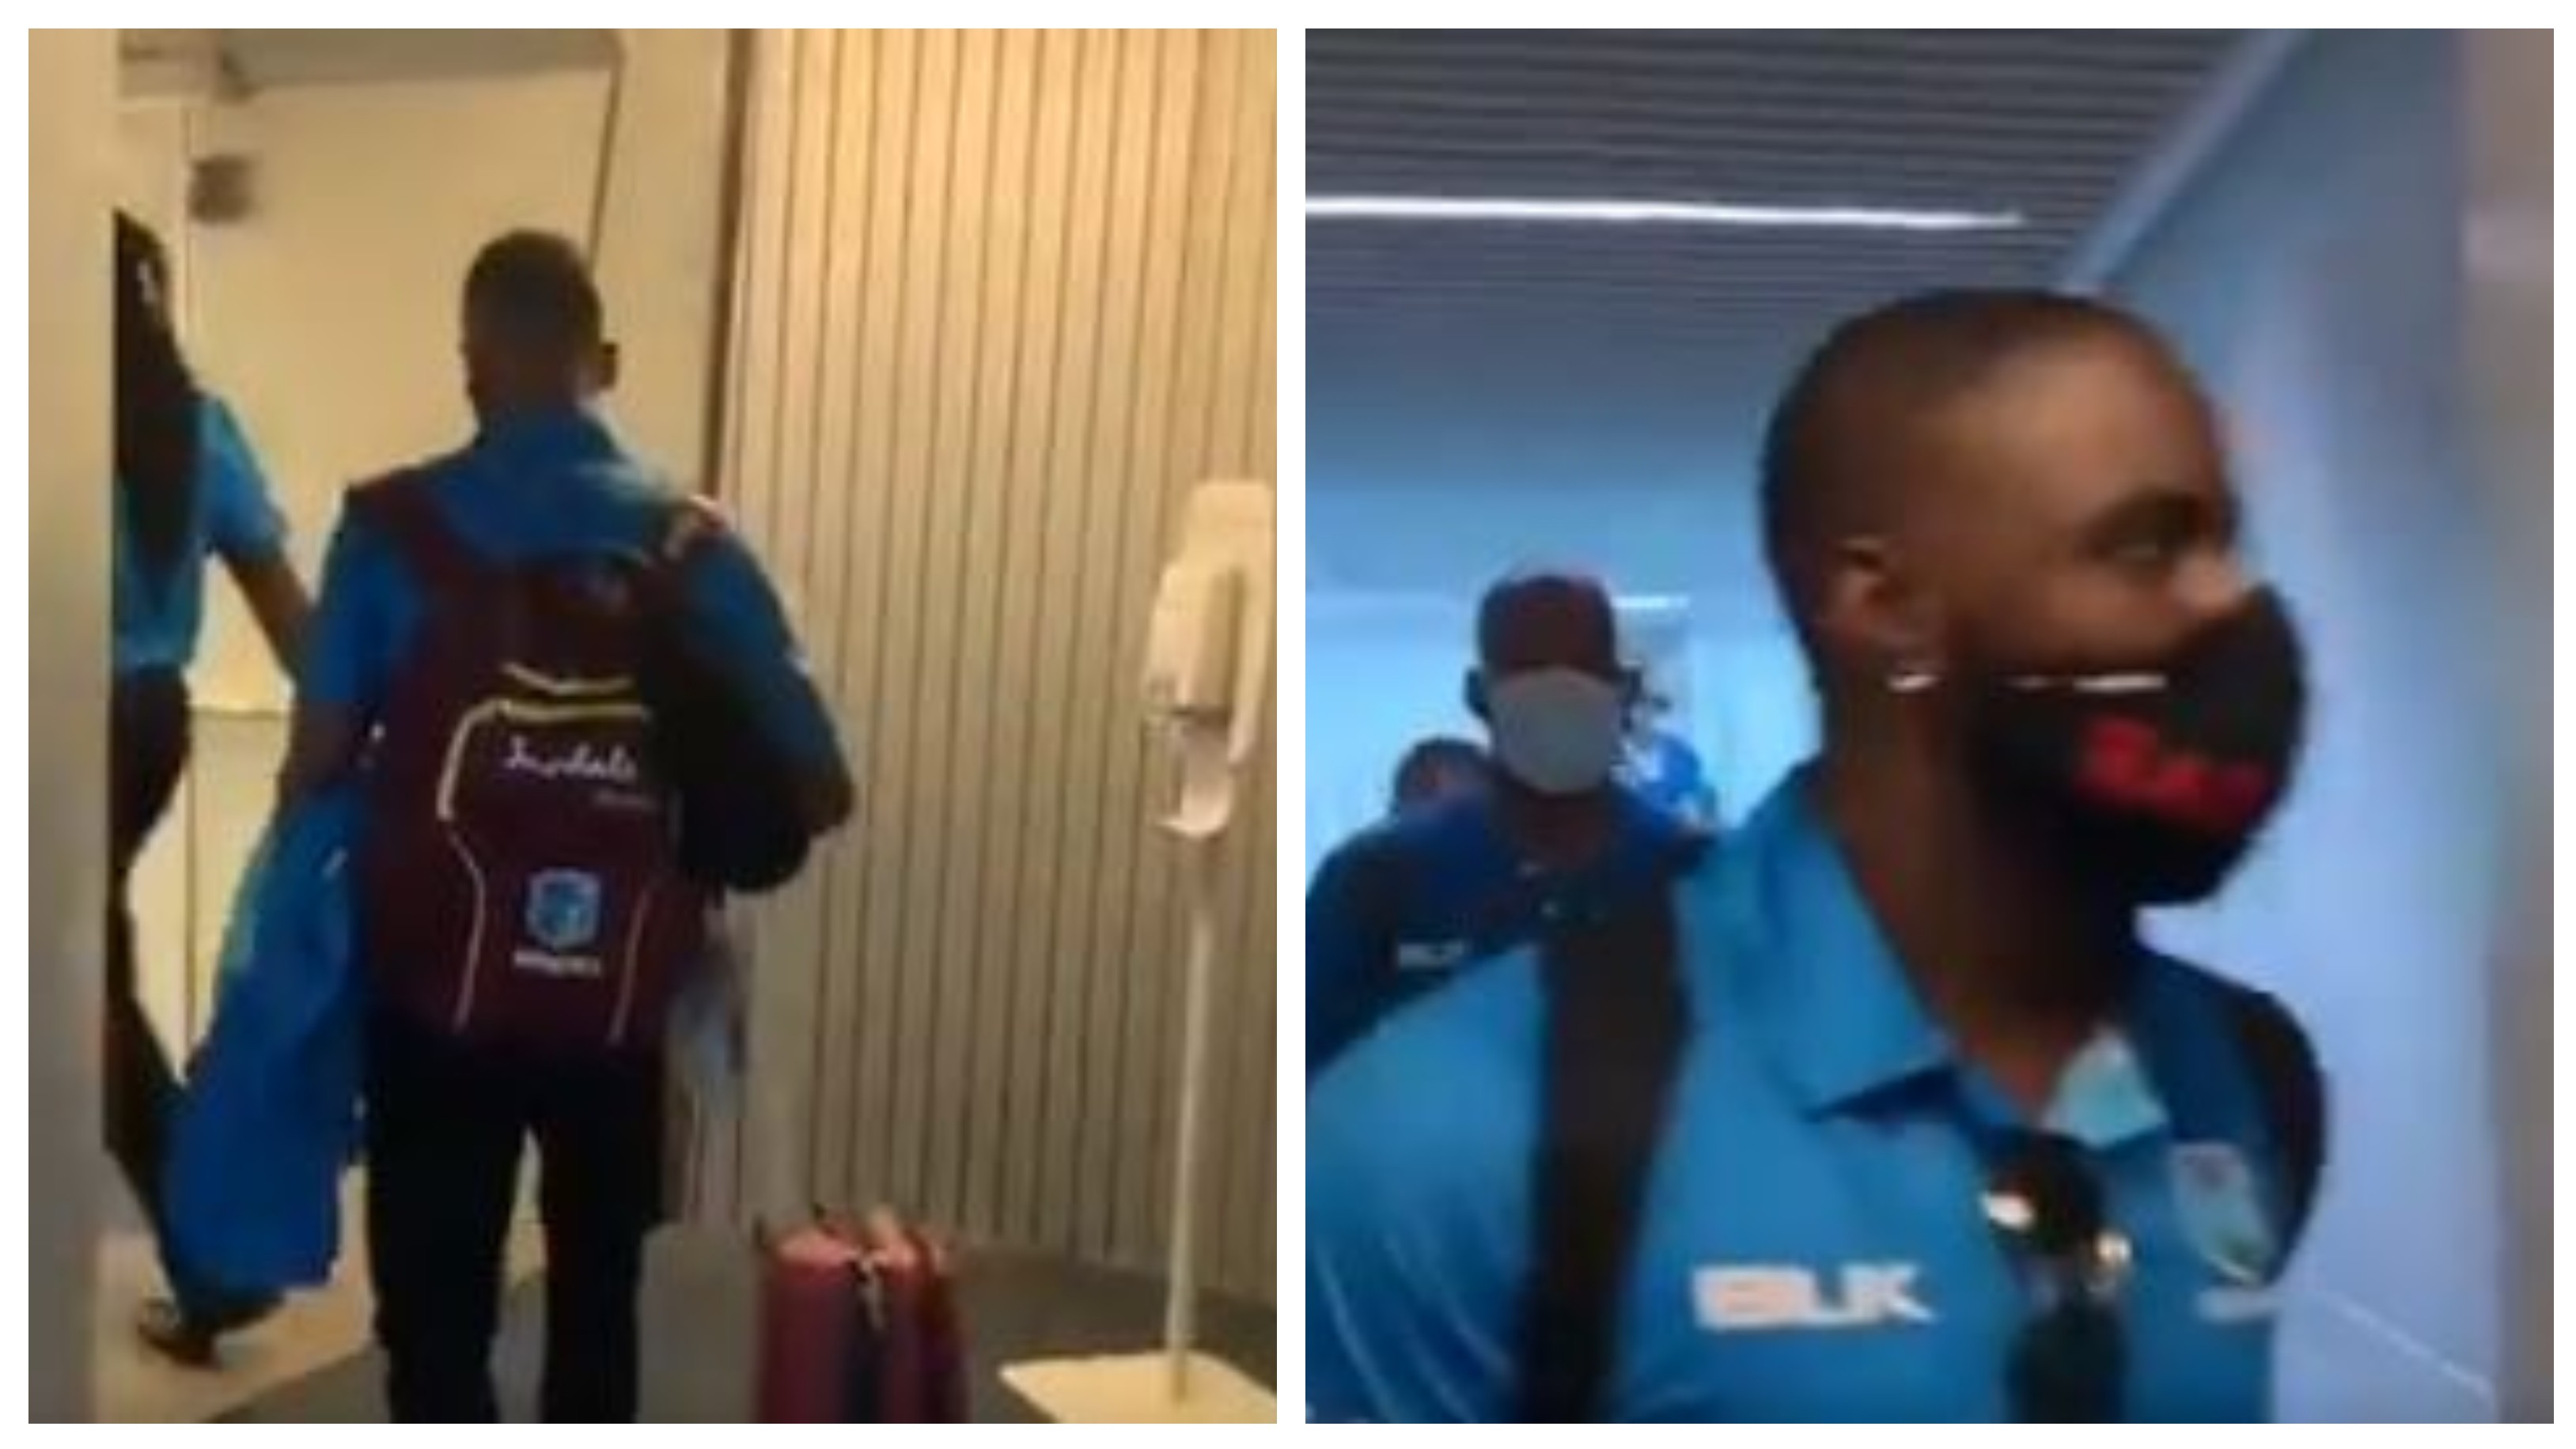 ENG v WI 2020: West Indies cricketers depart for England tour after testing COVID-19 negative